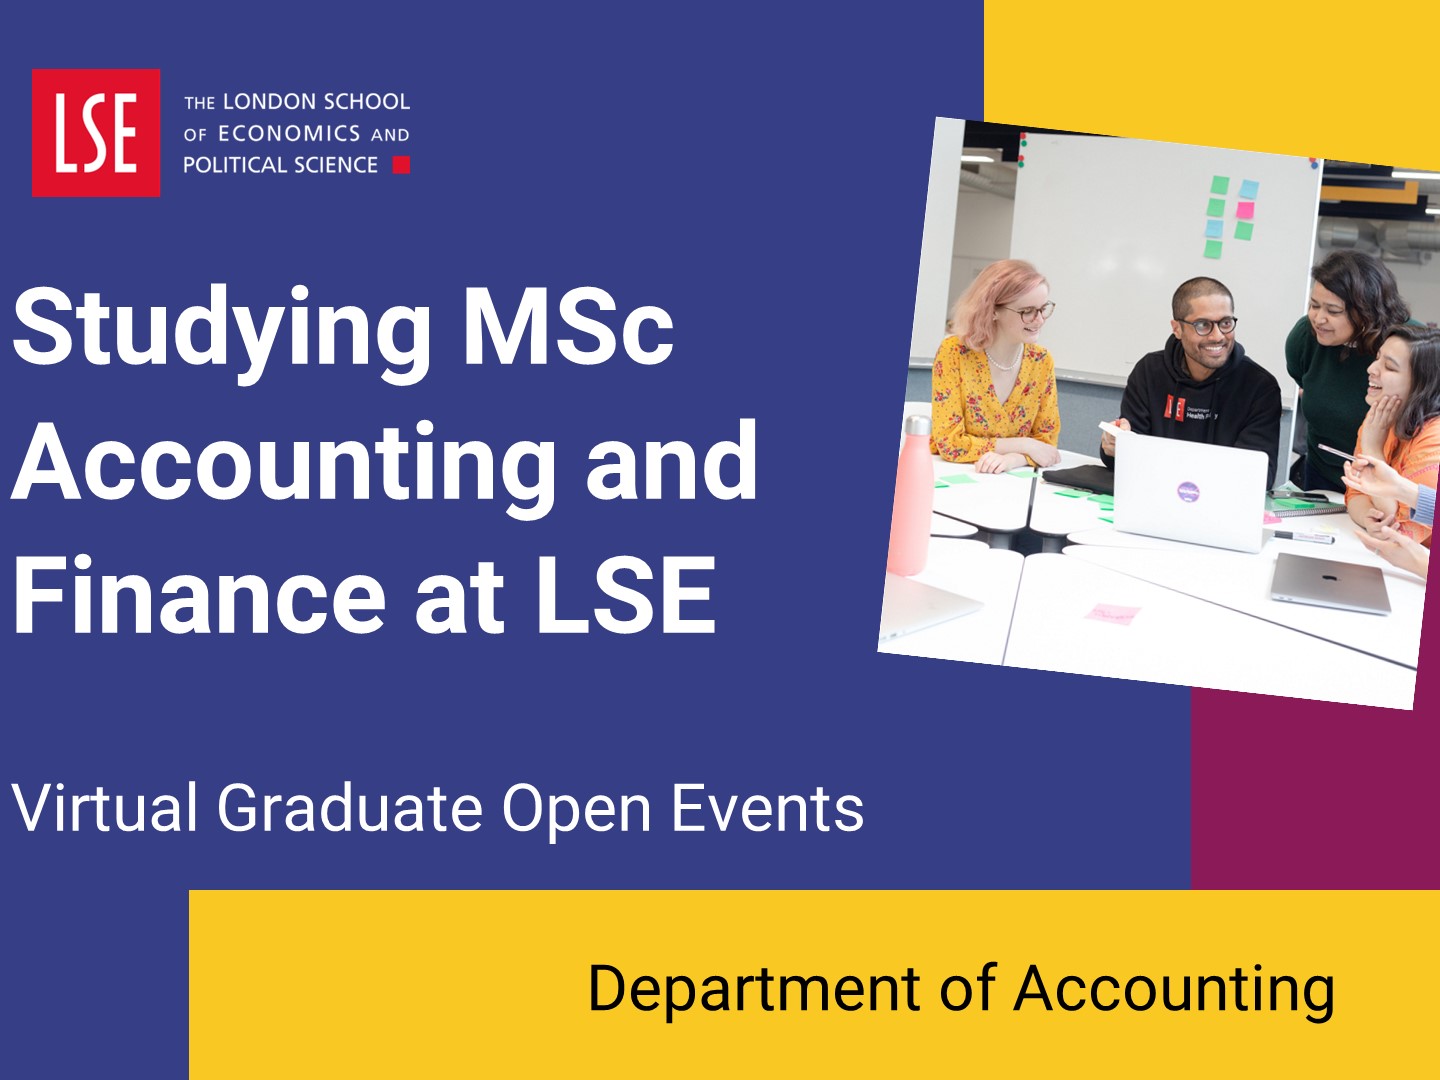 Introduction to MSc in Accounting and Finance